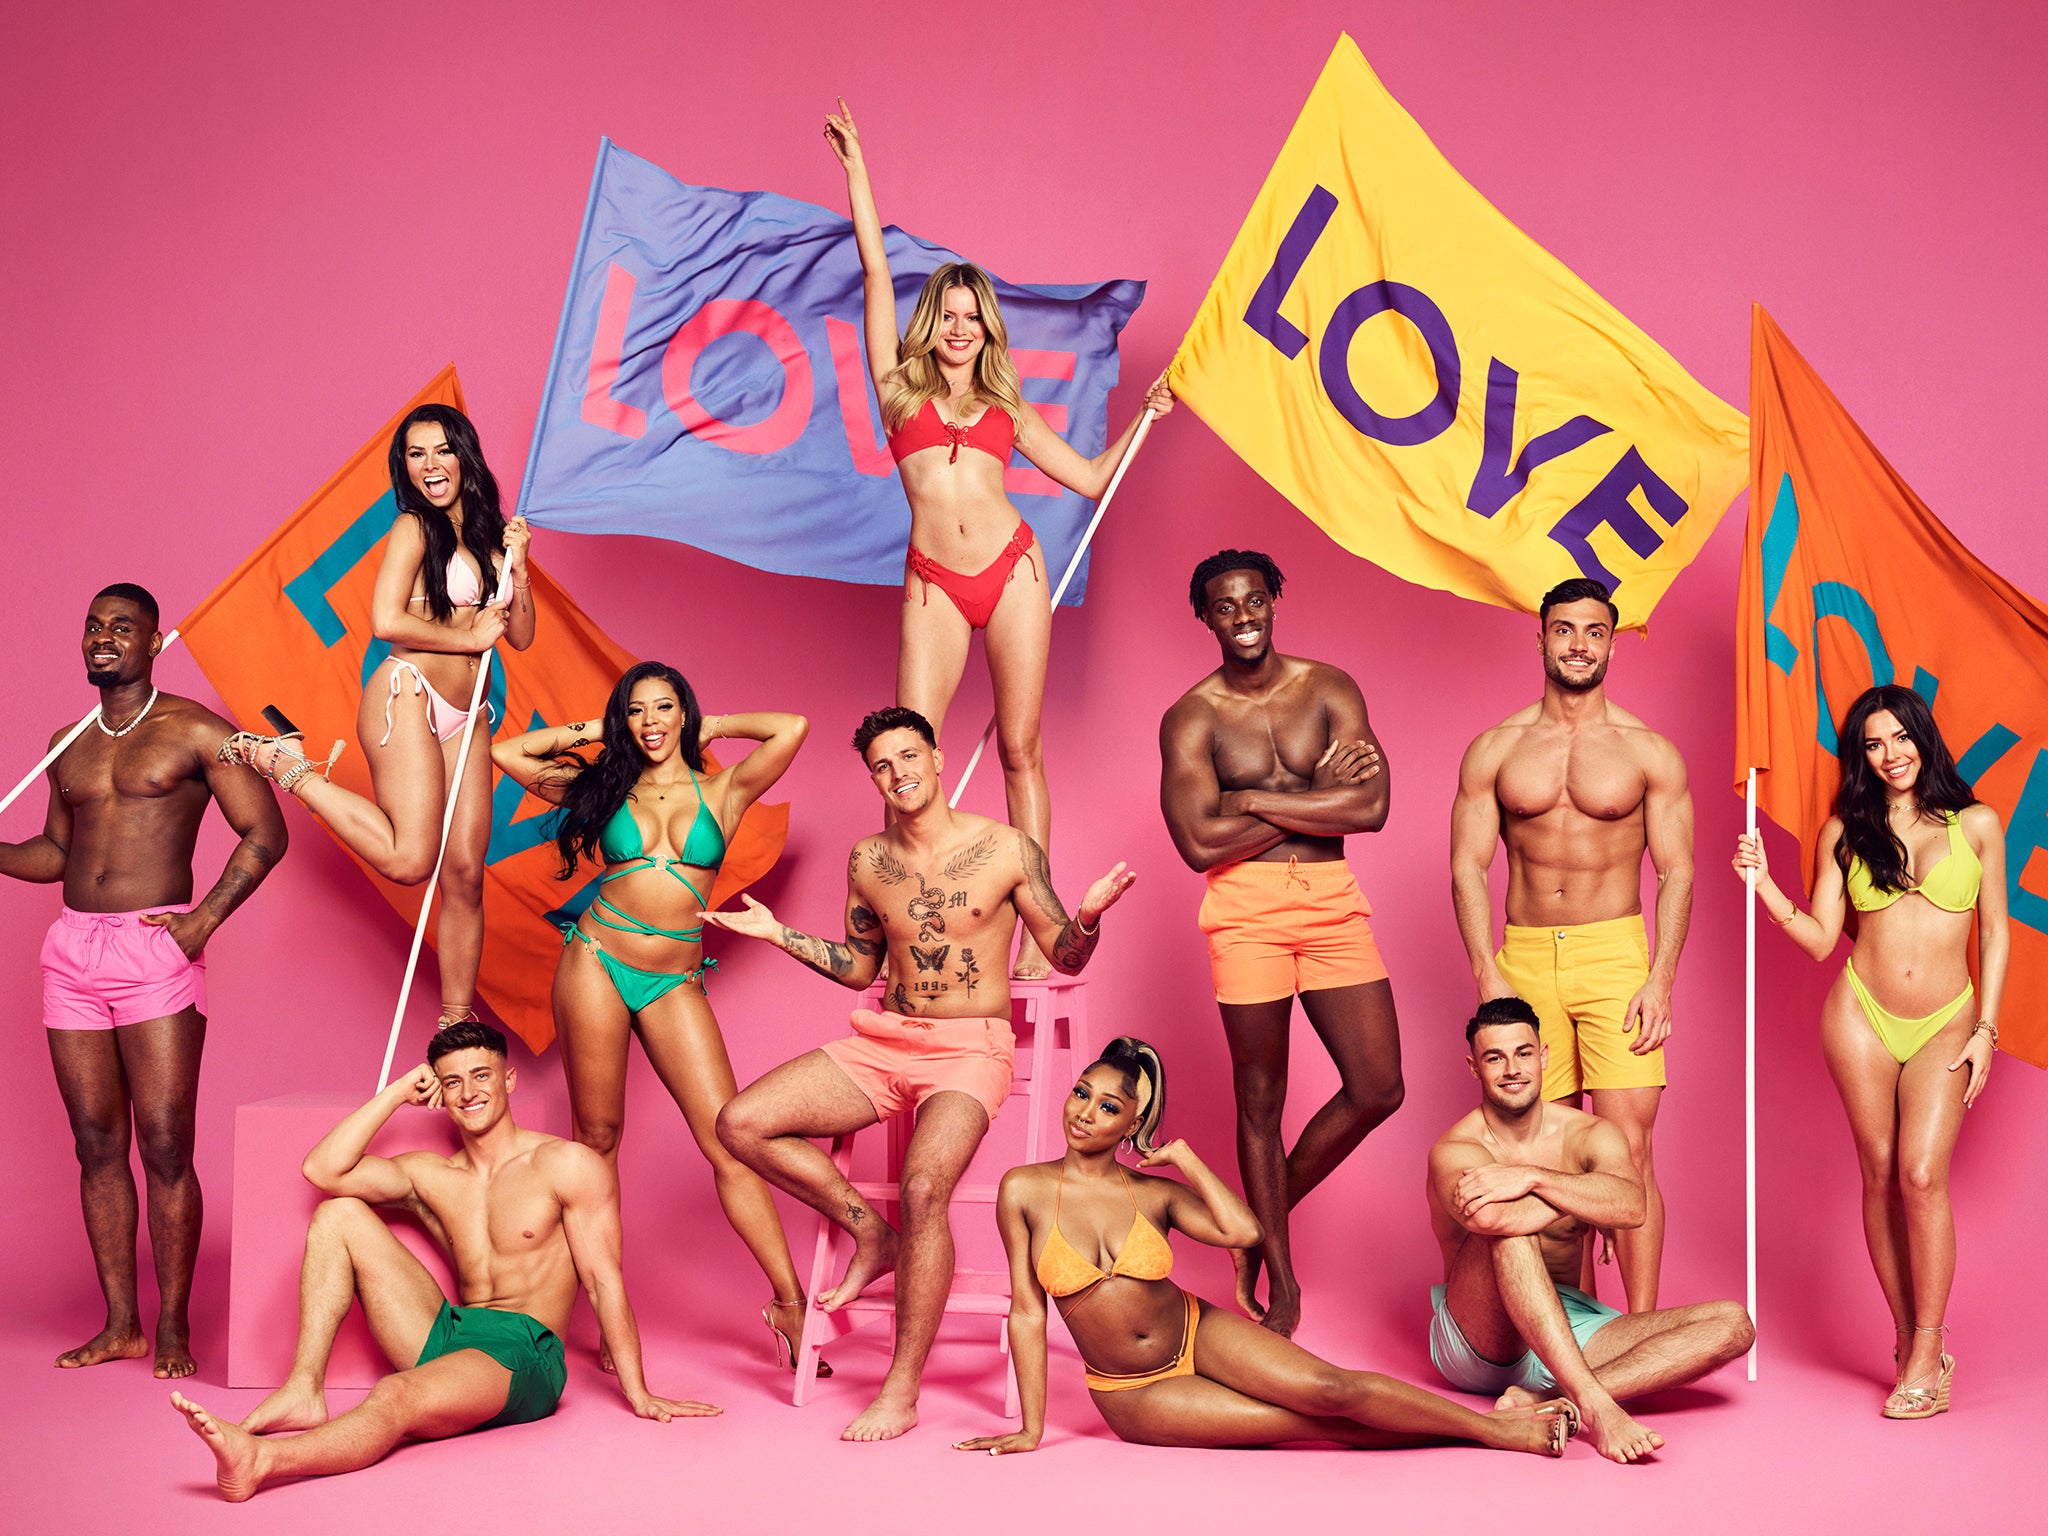 ITV’s ‘Love Island’ has been marked by some as a cause of the rise in requests for cosmetic filler and Botox in young people